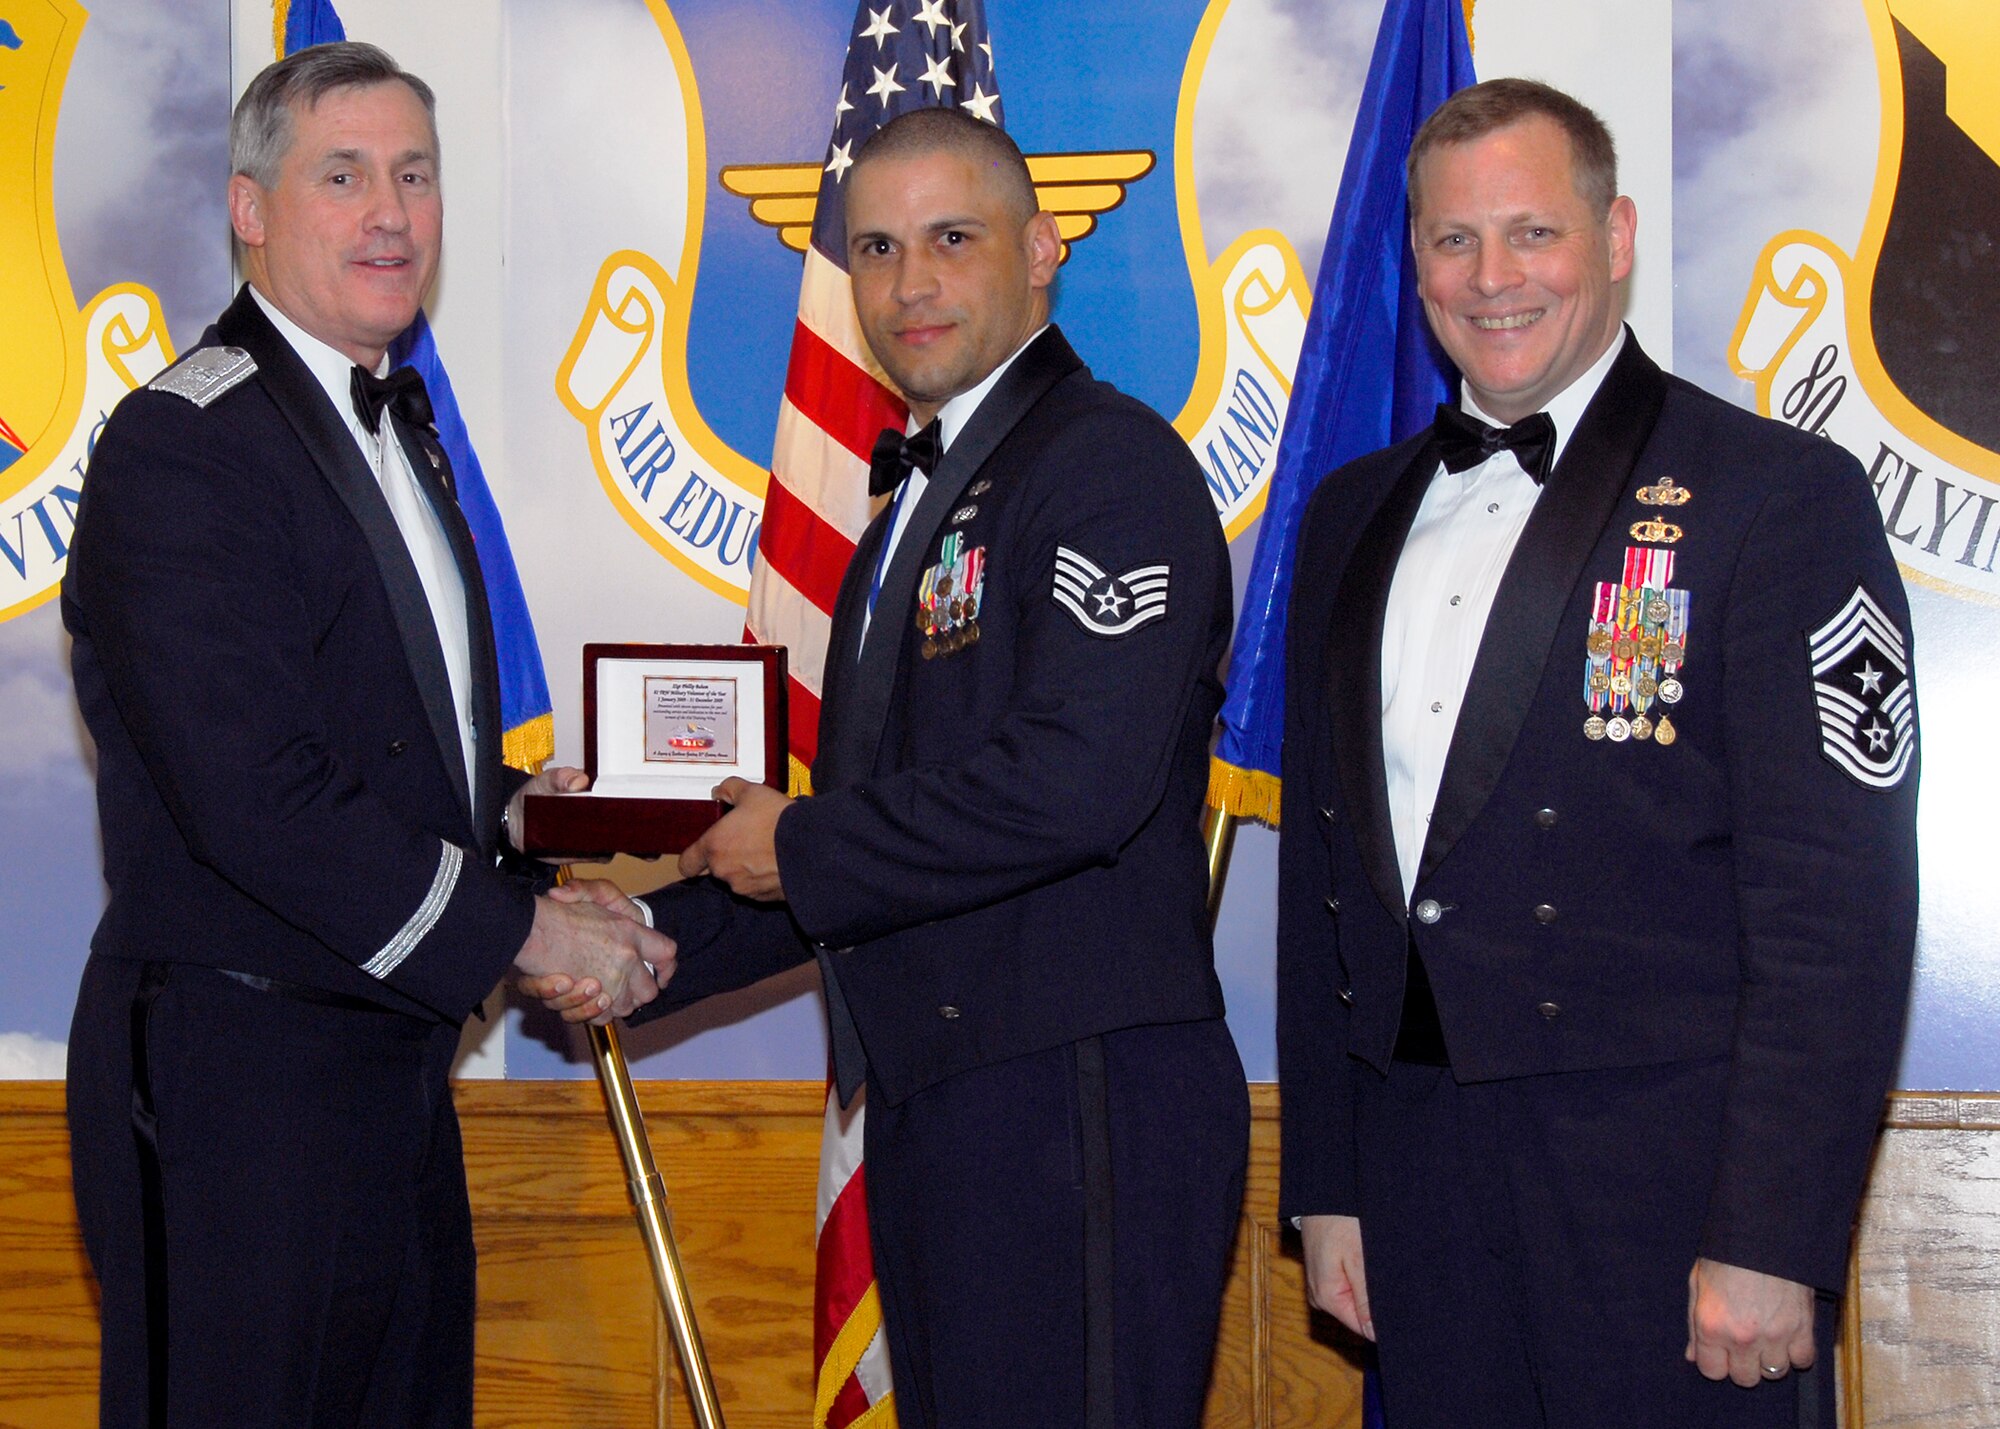 Brig. Gen. O.G. Mannon, 82nd Training Wing commander, presents Staff Sgt. Phillip Baham, 366th Training Squadron, with the Military Volunteer of the Year award, March 5 during the 2009 82nd TRW Annual Awards banquet. Also pictured is wing Command Chief, Chief Master Sgt. Kenneth Sallinger. (U.S. Air Force photo/Harry Tonemah) 